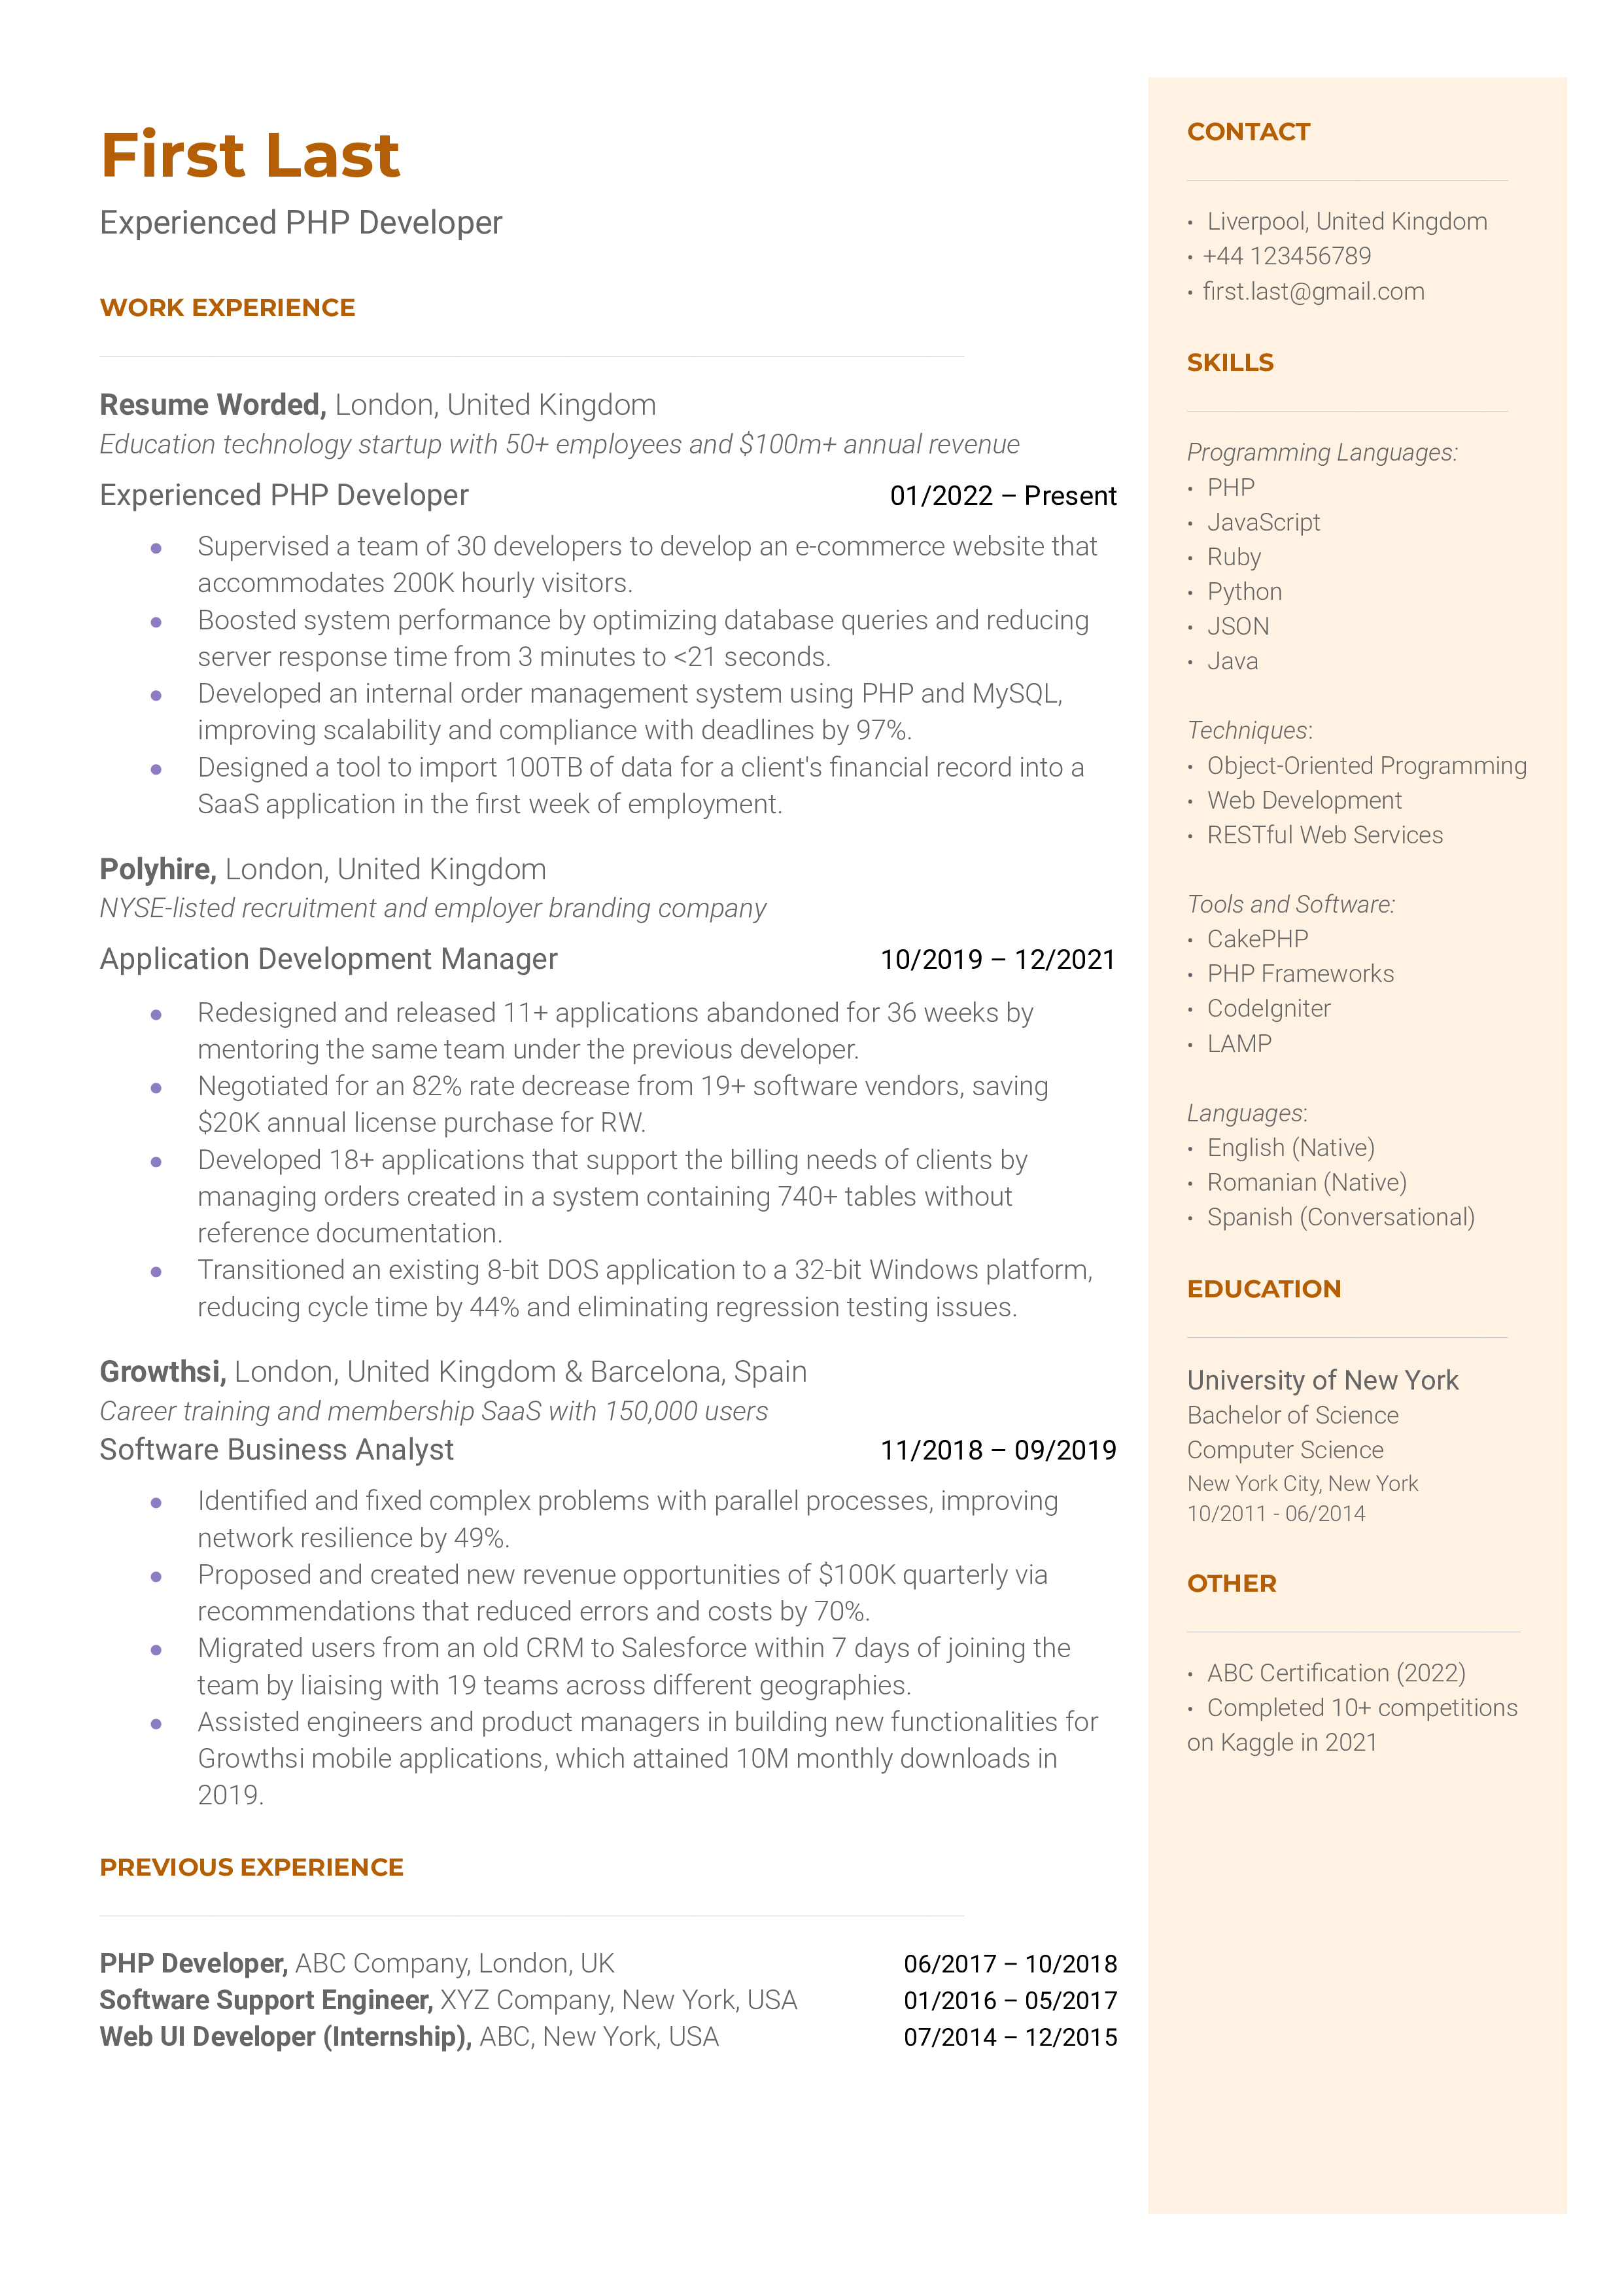 A snapshot showing a CV of an experienced PHP developer emphasizing on frameworks proficiency and successful projects.